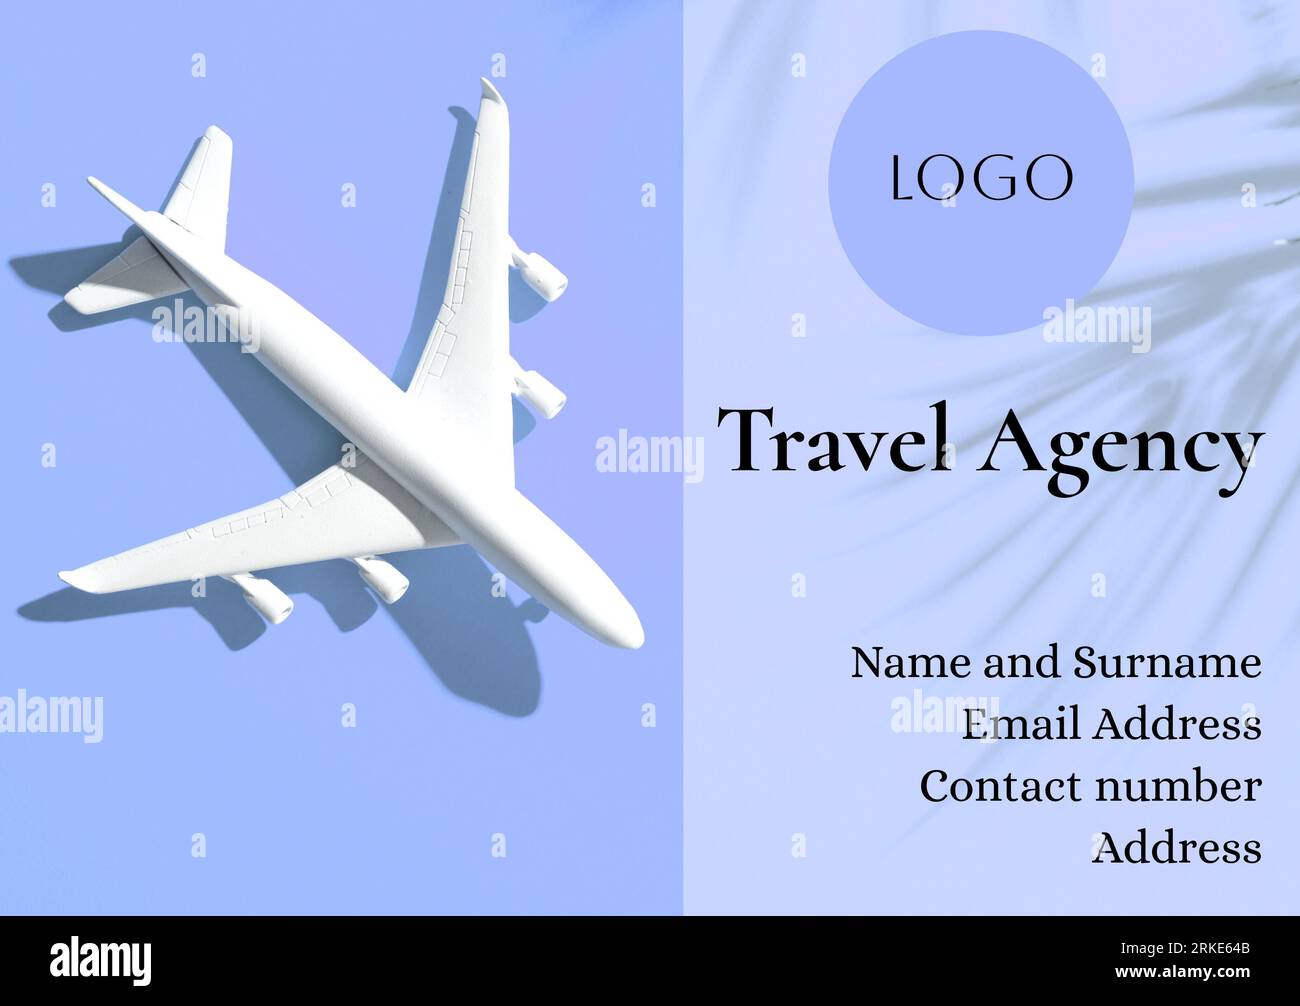 Composite of toy airplane and logo, travel agency, name, surname, address, contact and email details Stock Photo